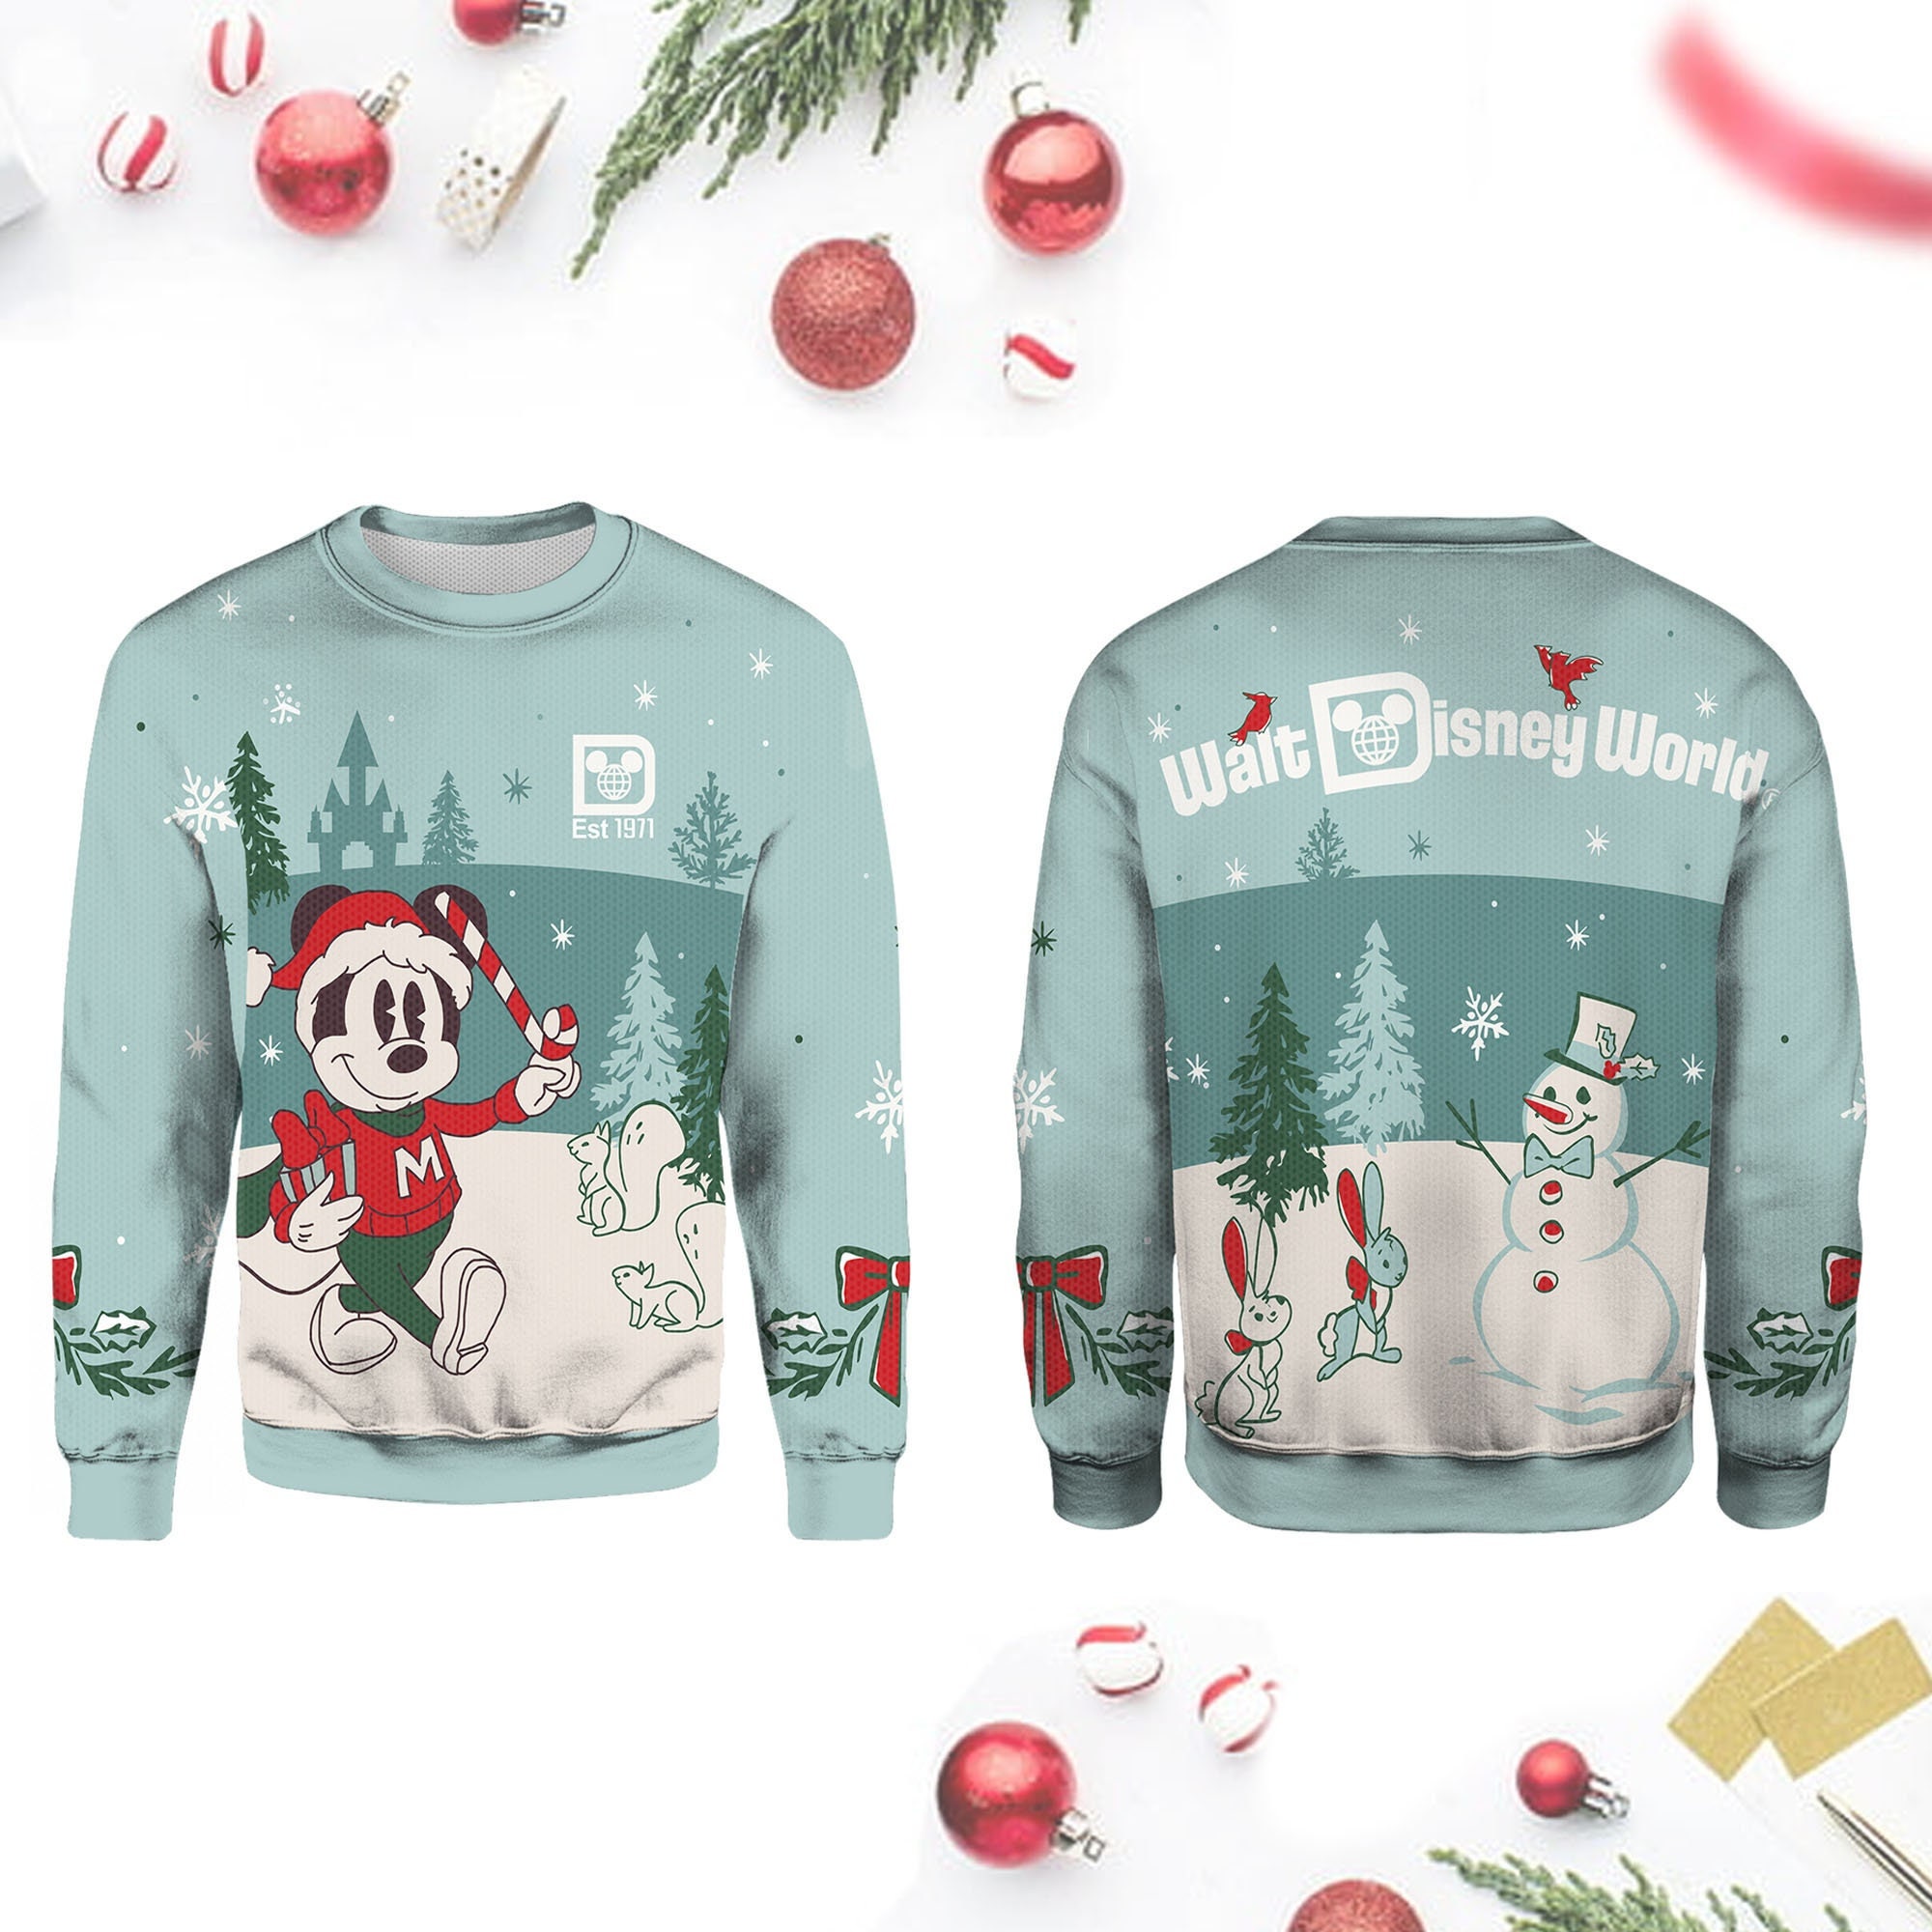 Discover Mickey Mouse Holiday Spirit Jersey Christmas Sweater